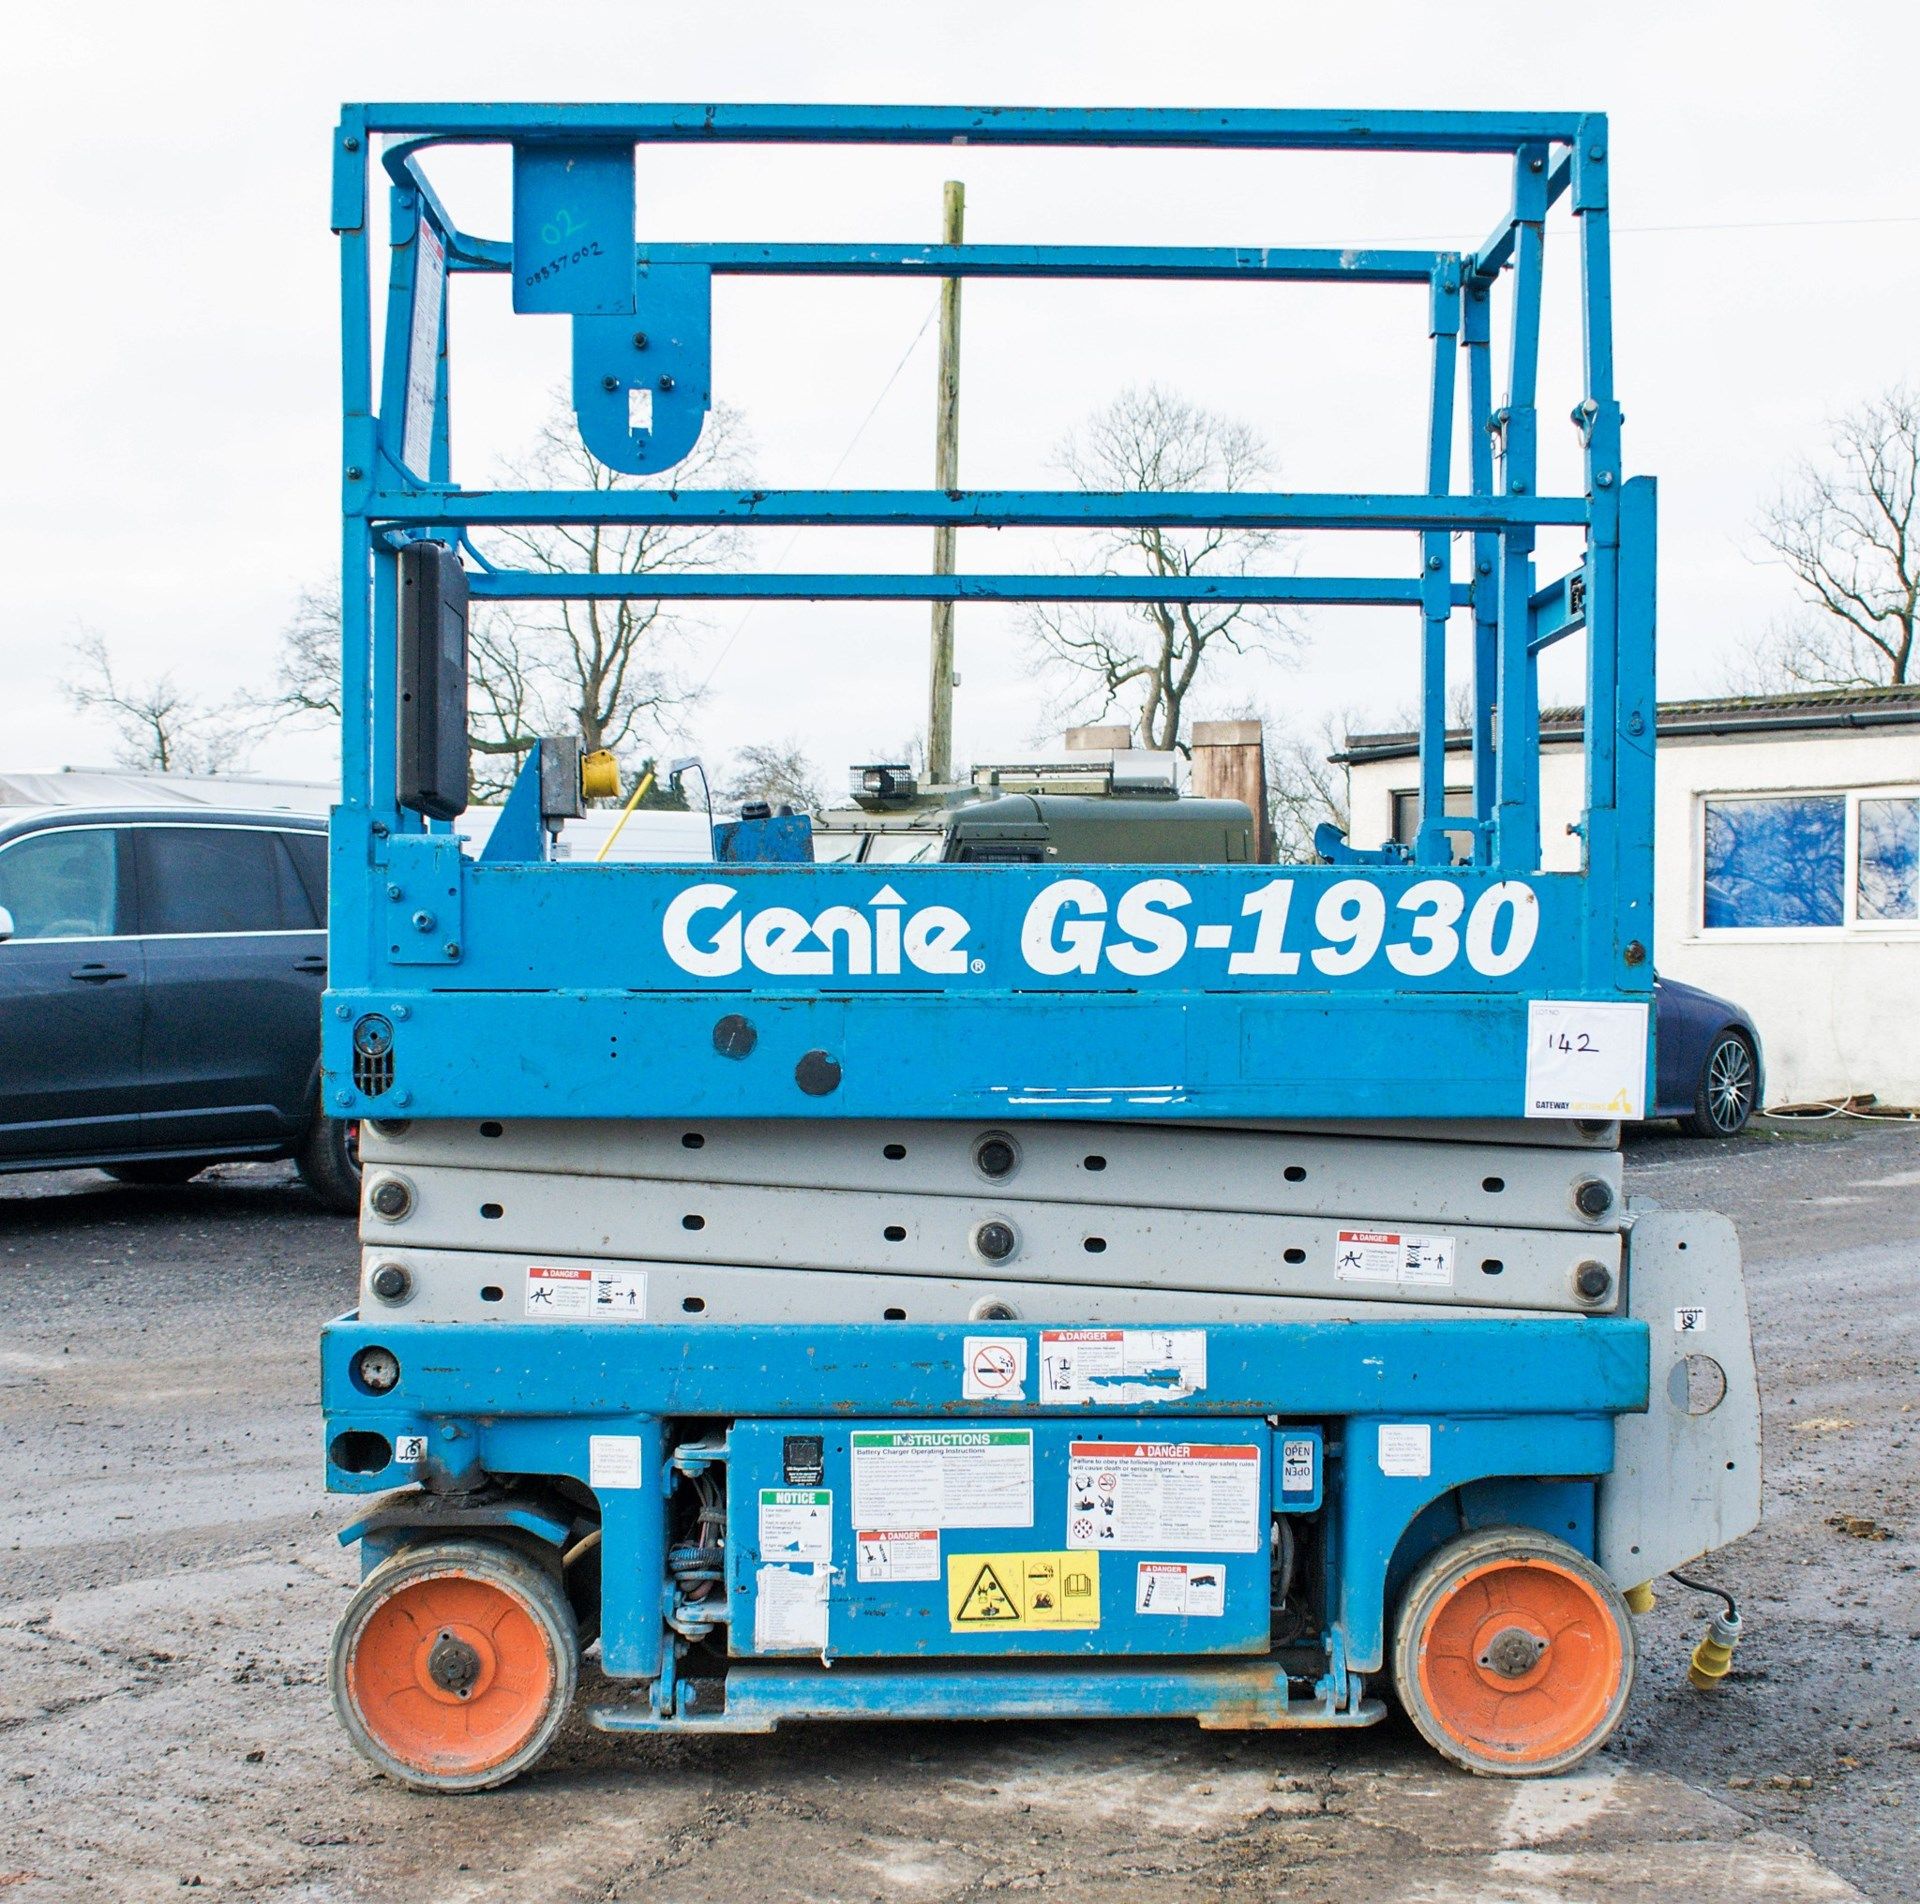 1 x Genie GS-1930 Scissorlift - Fully functional - Max Working Height 7.79m - CL011 - Location: - Image 6 of 8